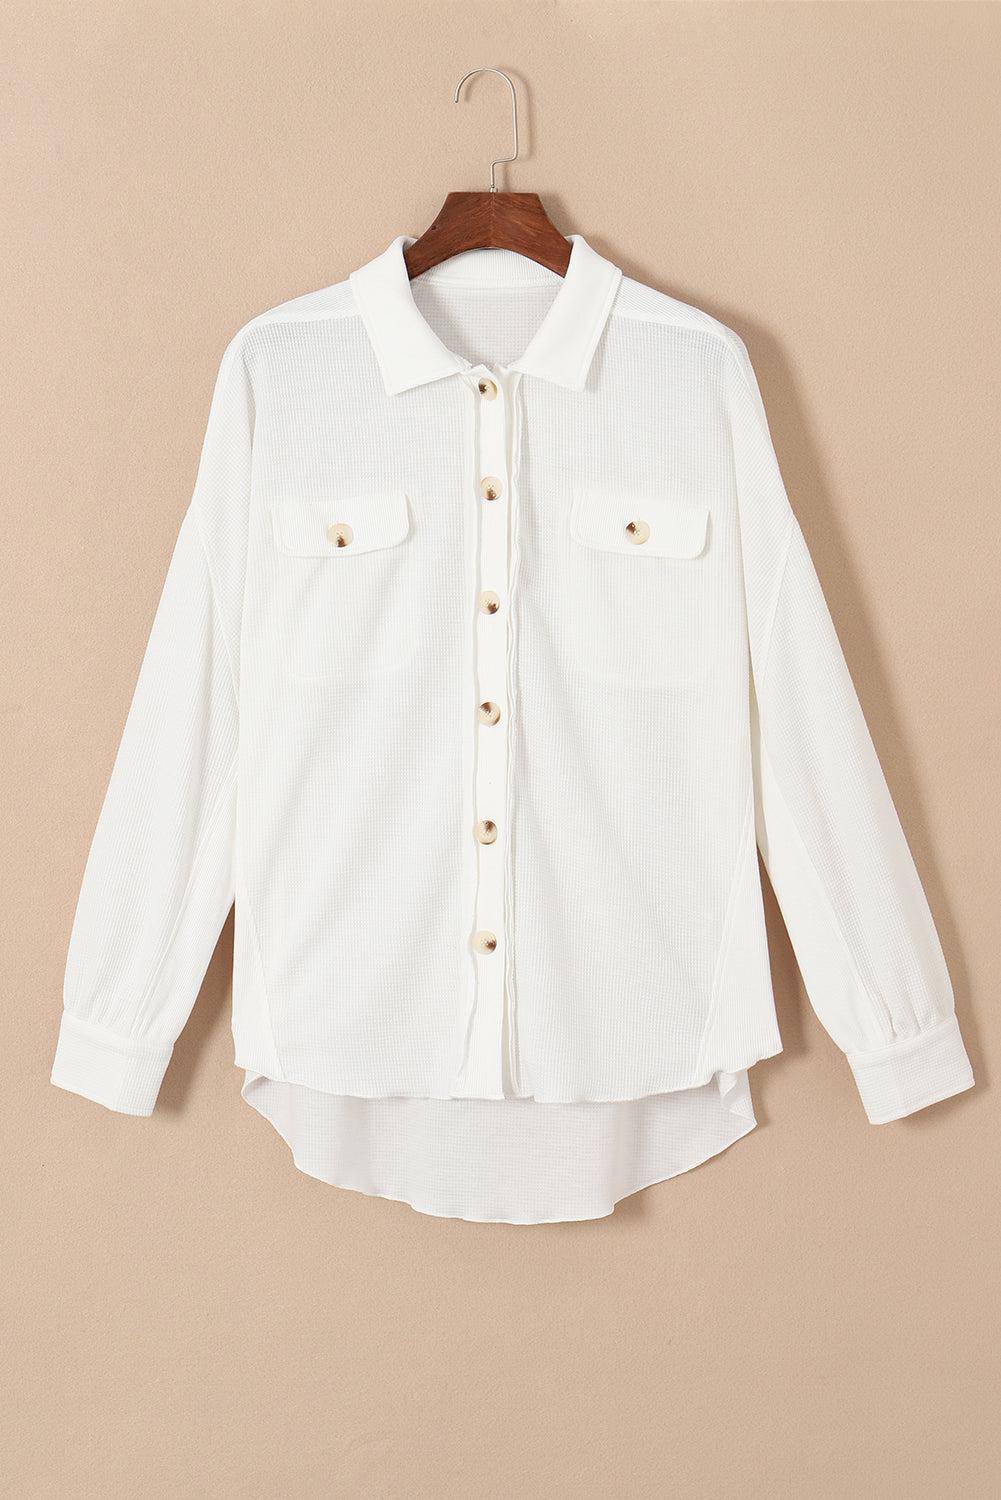 a white shirt hanging on a wooden hanger